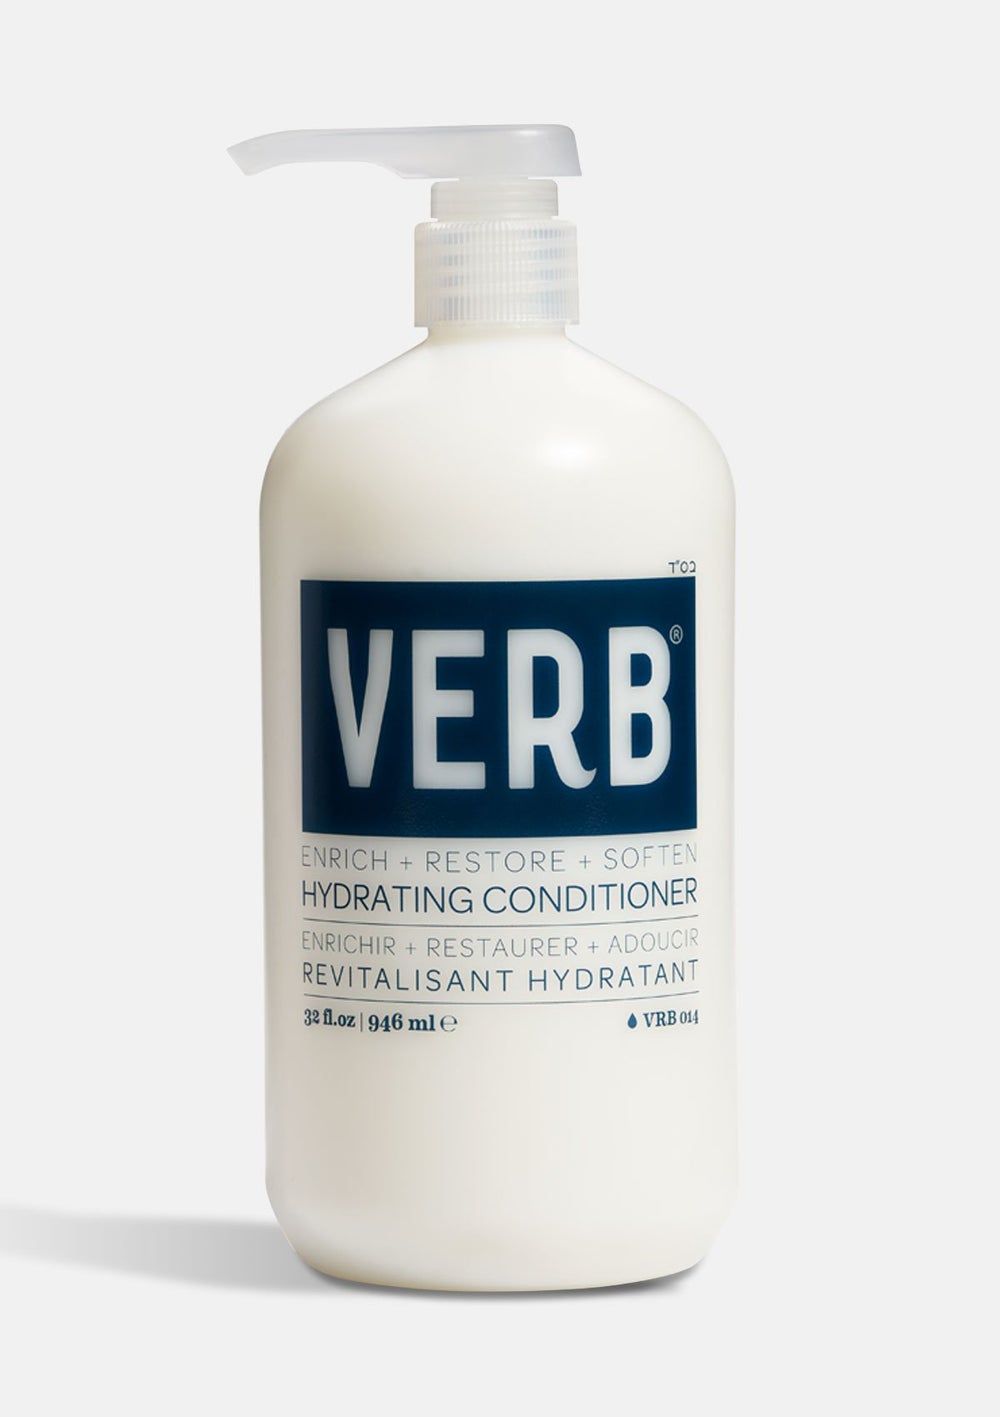 Verb - Hydrating Conditioner Enrich + Restore + Soften |32 oz| - by Verb |ProCare Outlet|